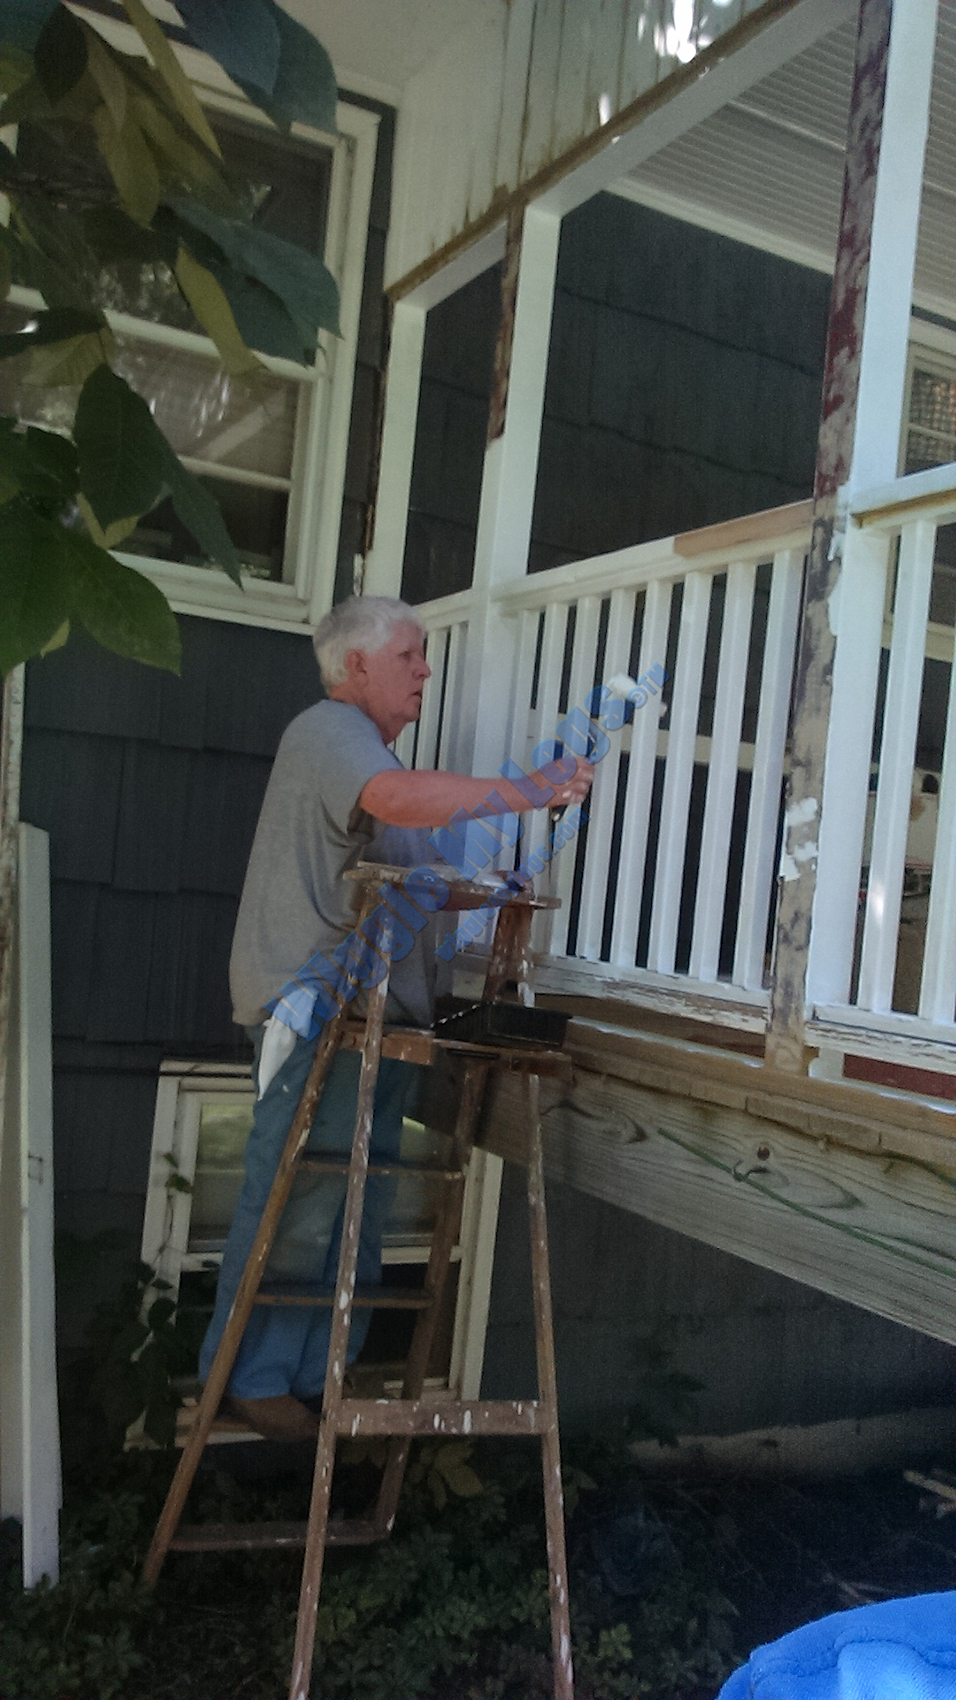 Home owner cameo appearance as a spindle painter.